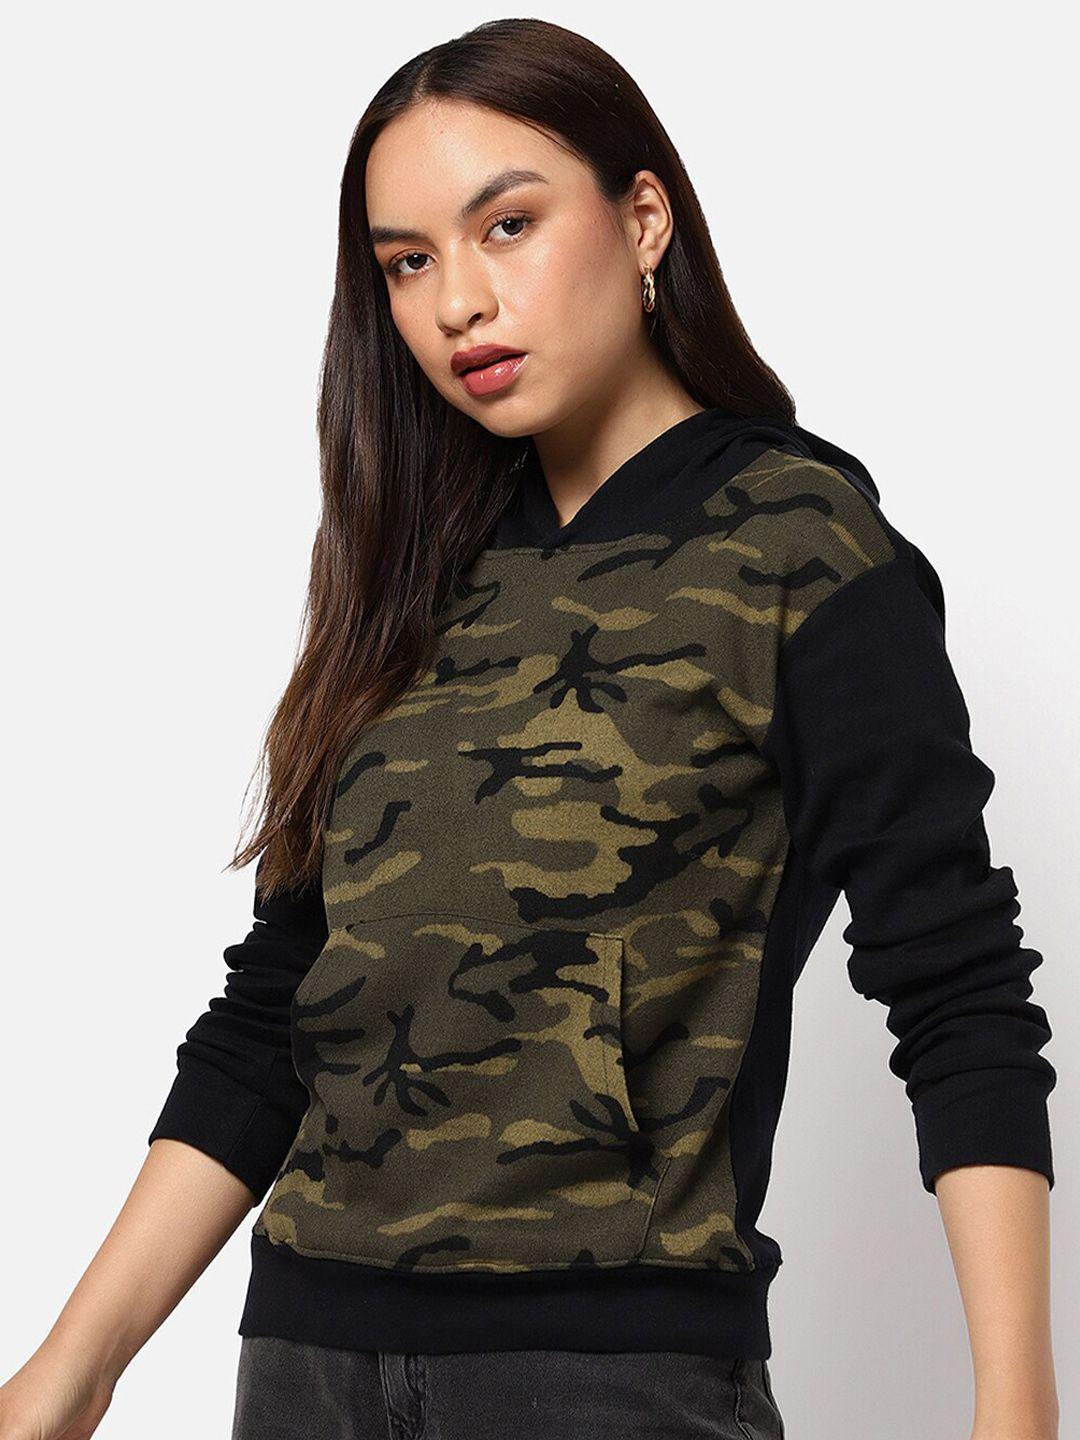 campus sutra women olive green camouflage printed hooded sweatshirt